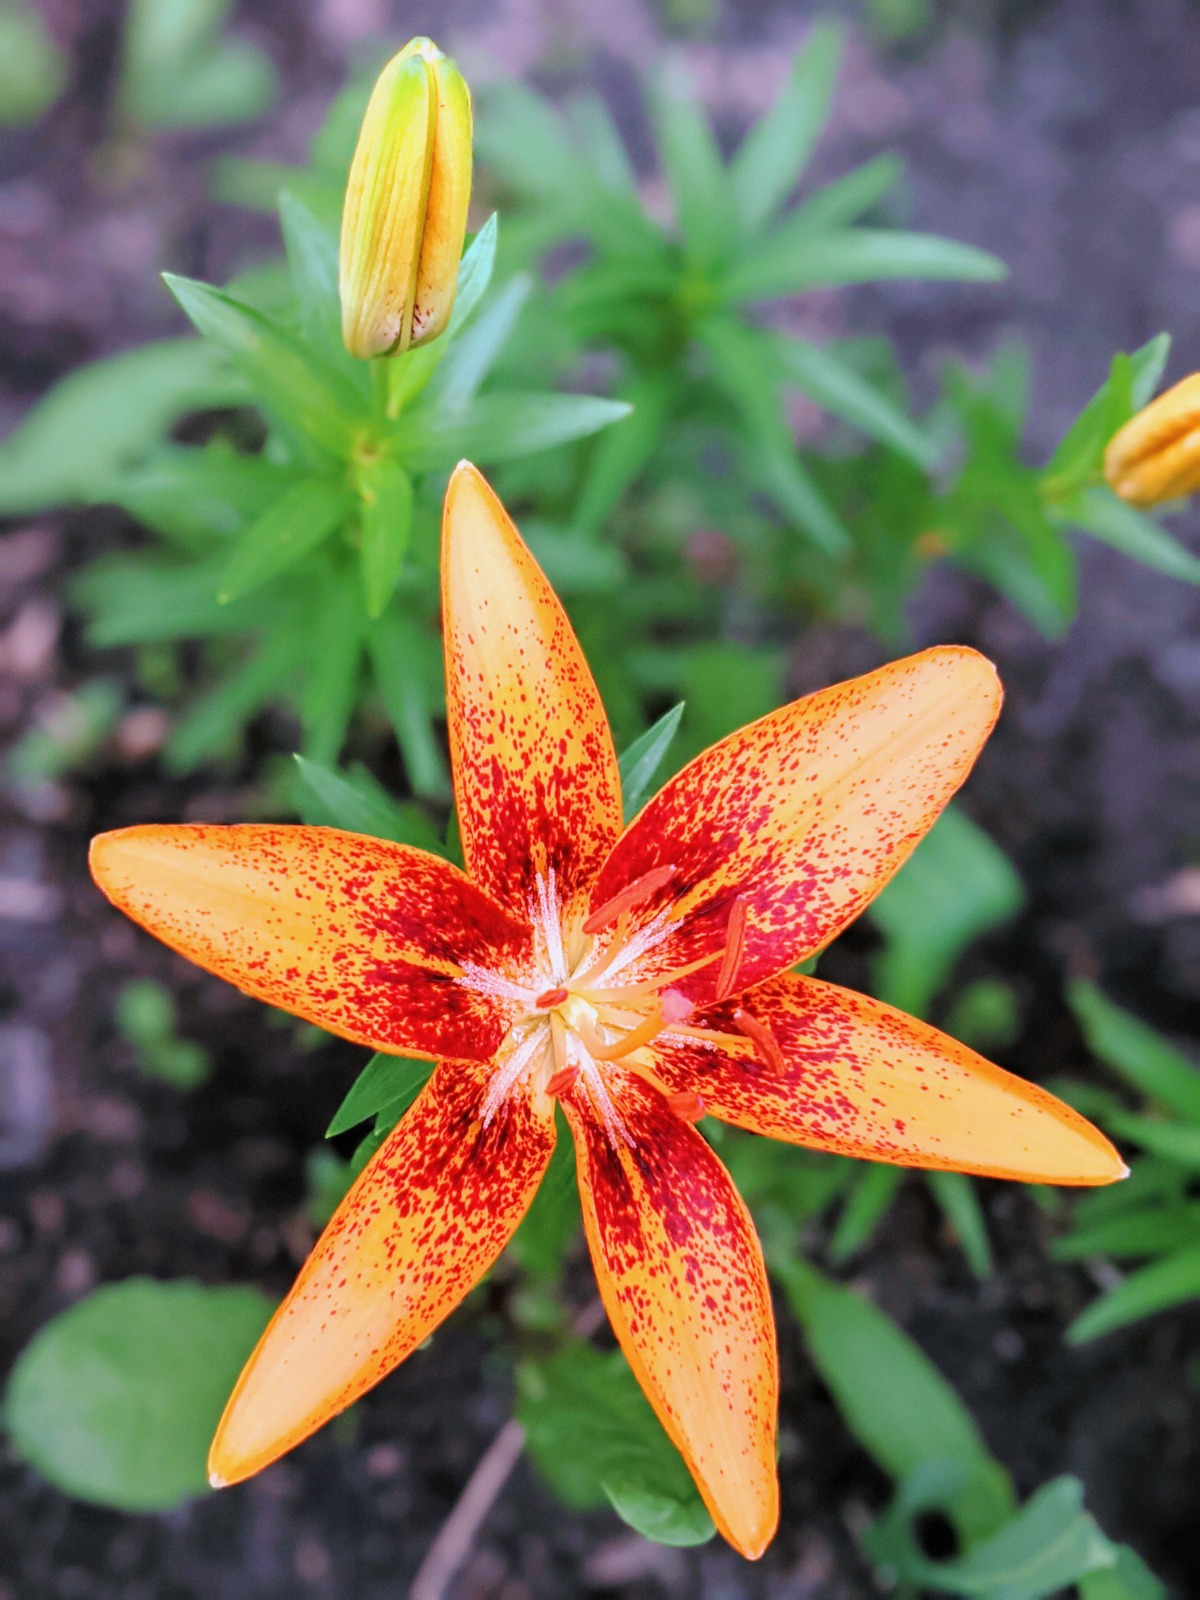 Orange Lilies with Red Centers